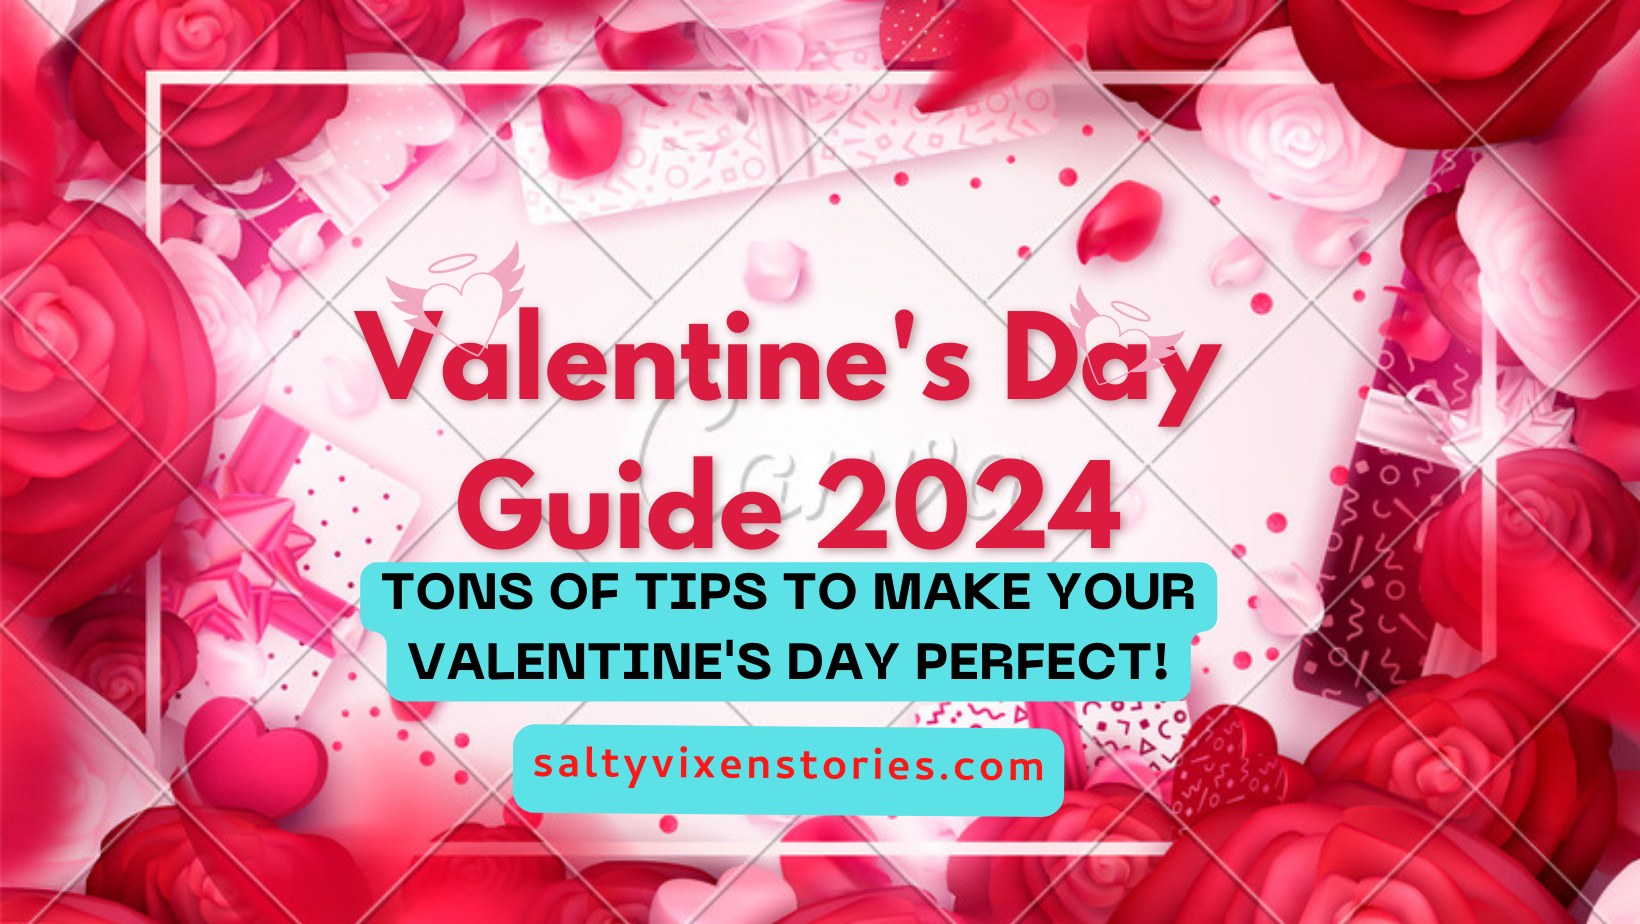 Valentine's Day Guide 2024 ~ Salty Vixen Stories & More